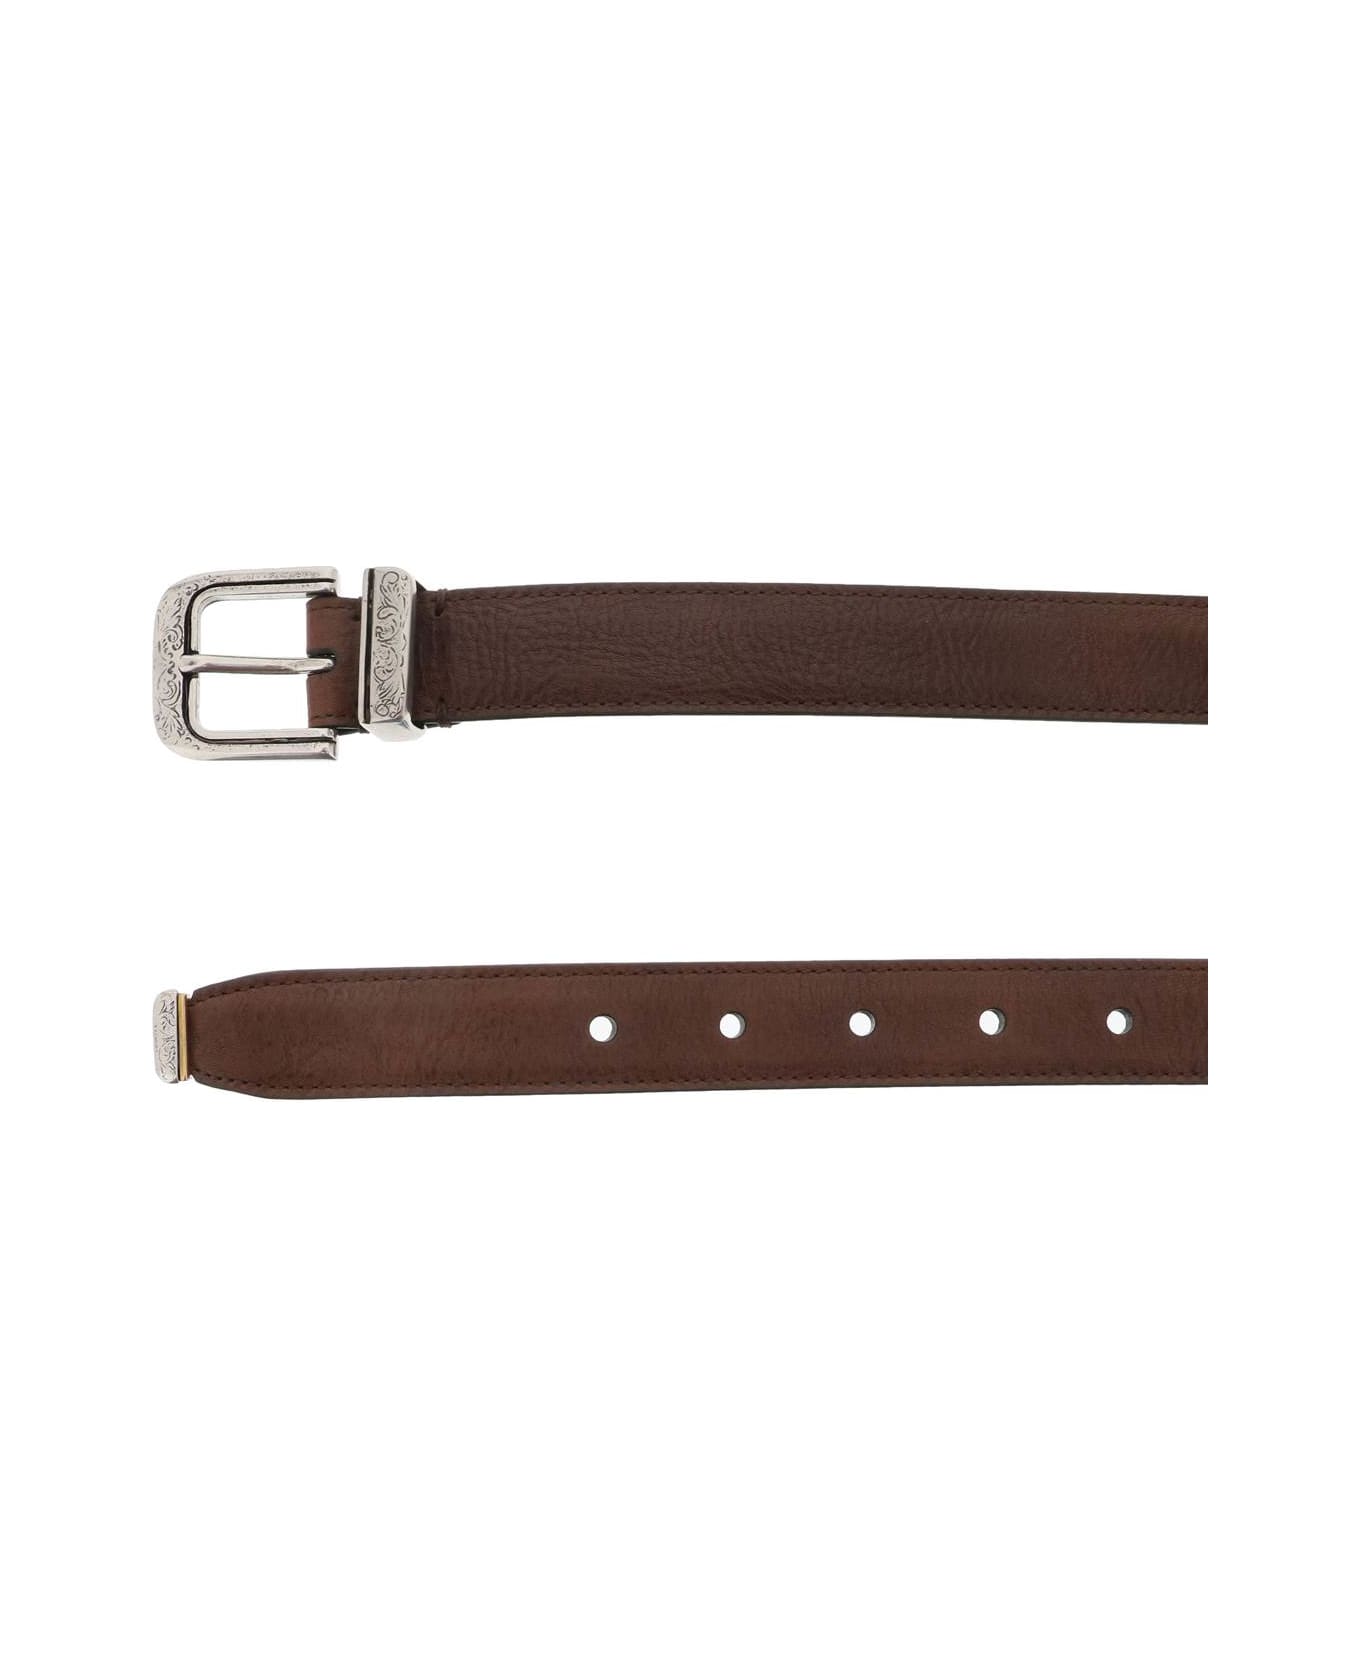 Brunello Cucinelli Leather Belt With Detailed Buckle - COTTO (Brown)